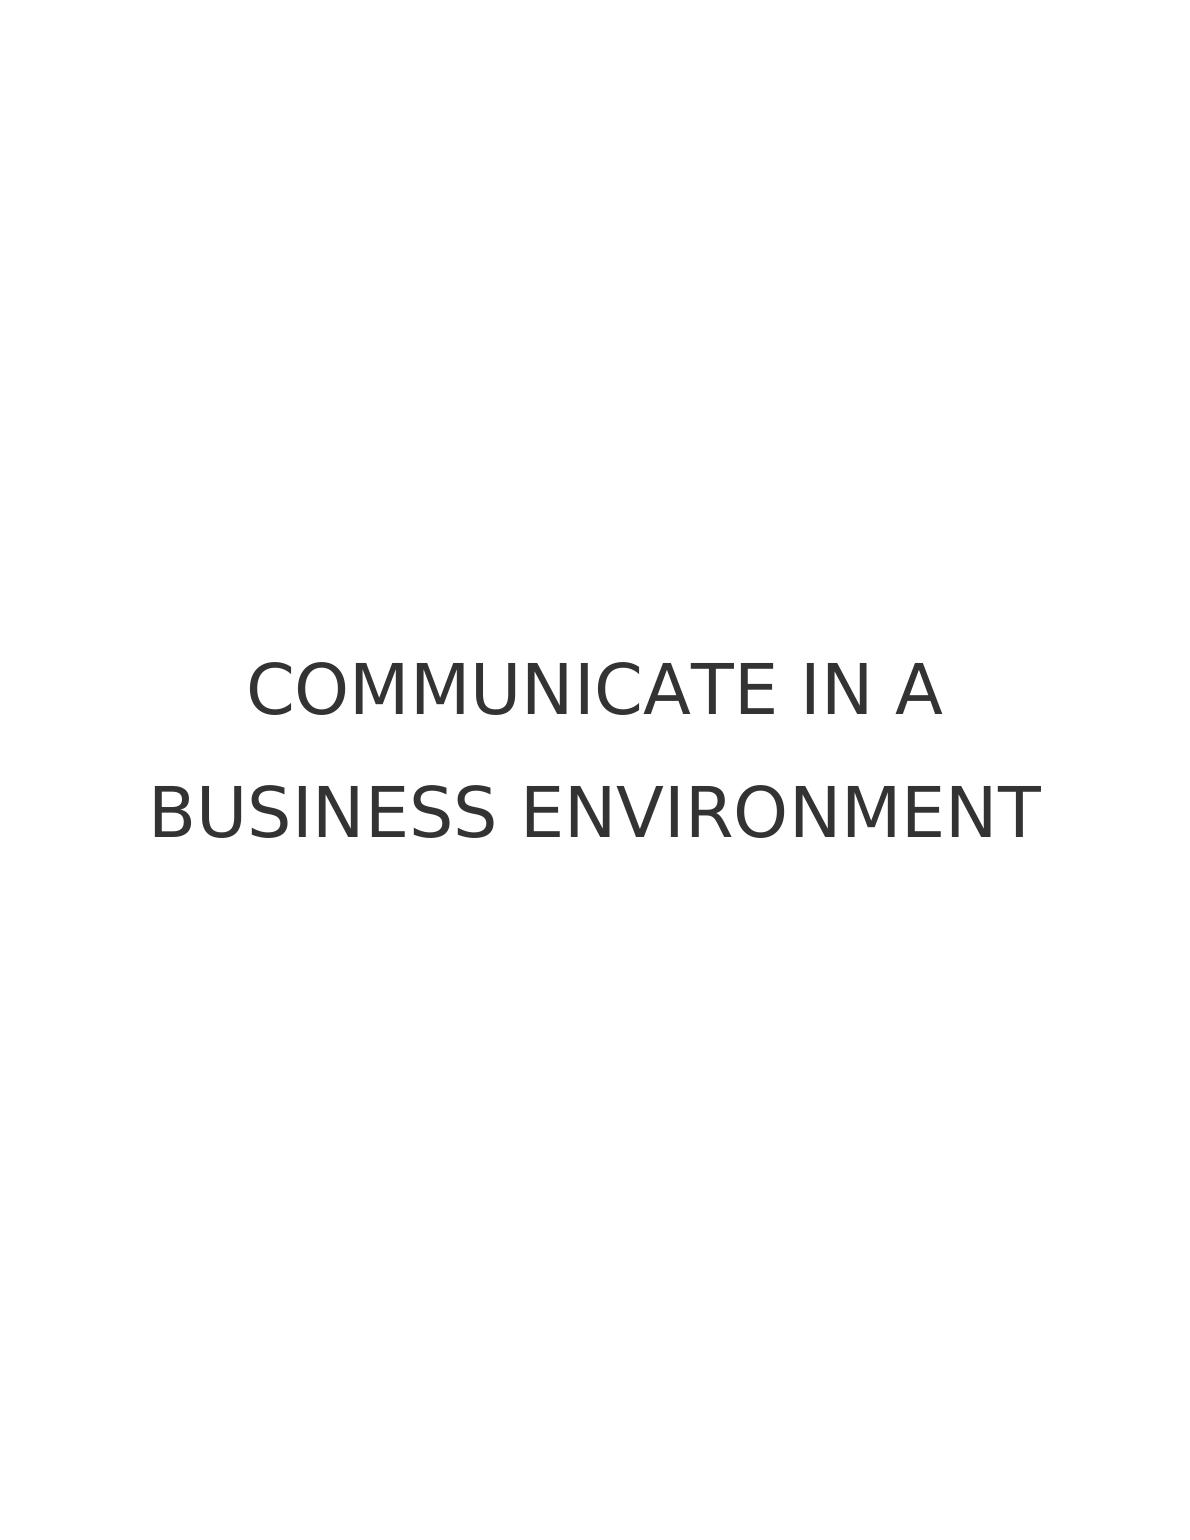 Communication in Business Environment - Doc_1